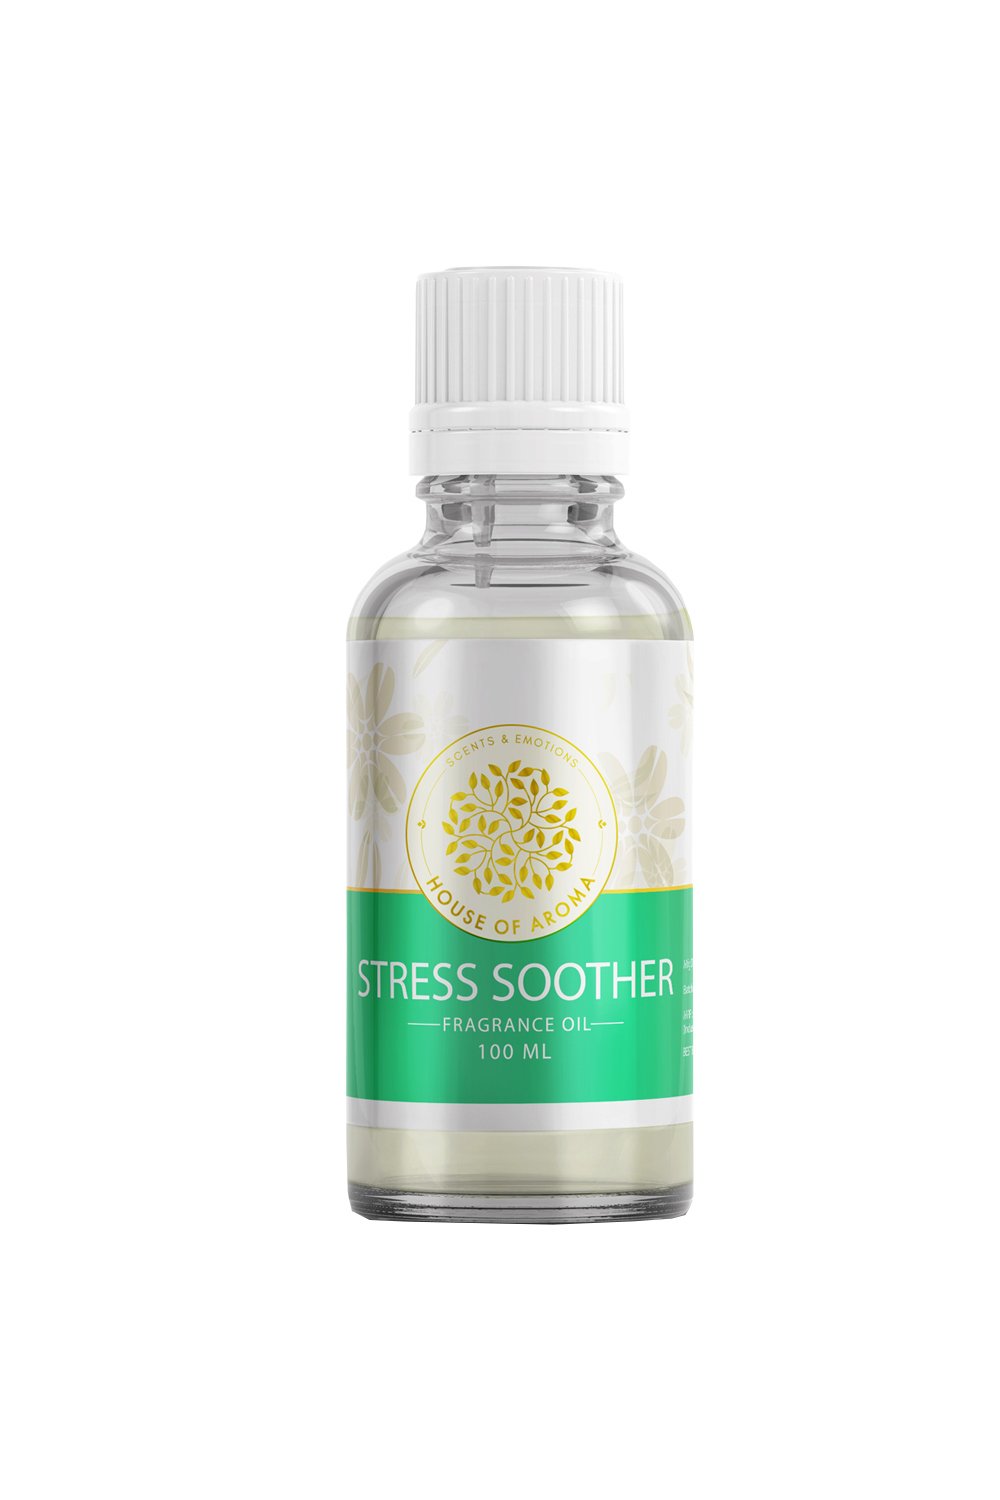 stress soother fragrance oil 100ml, Fragrance Oil, Aroma oil, Synthetic oils, Fragrance oil for candles, oil for diffusers, Aromatic oil, Candle oil, Aromatherapy oil, oil manufacturers, House of Aroma, stress soother fragrance oil, soothing fragrance, aroma oil for stress relief, best fragrance for relaxation, best fragrance for stress relief, stress soother aroma oil, stress soother oil, stress soother oil benefits, stress soother oil uses, fragrance for relaxation